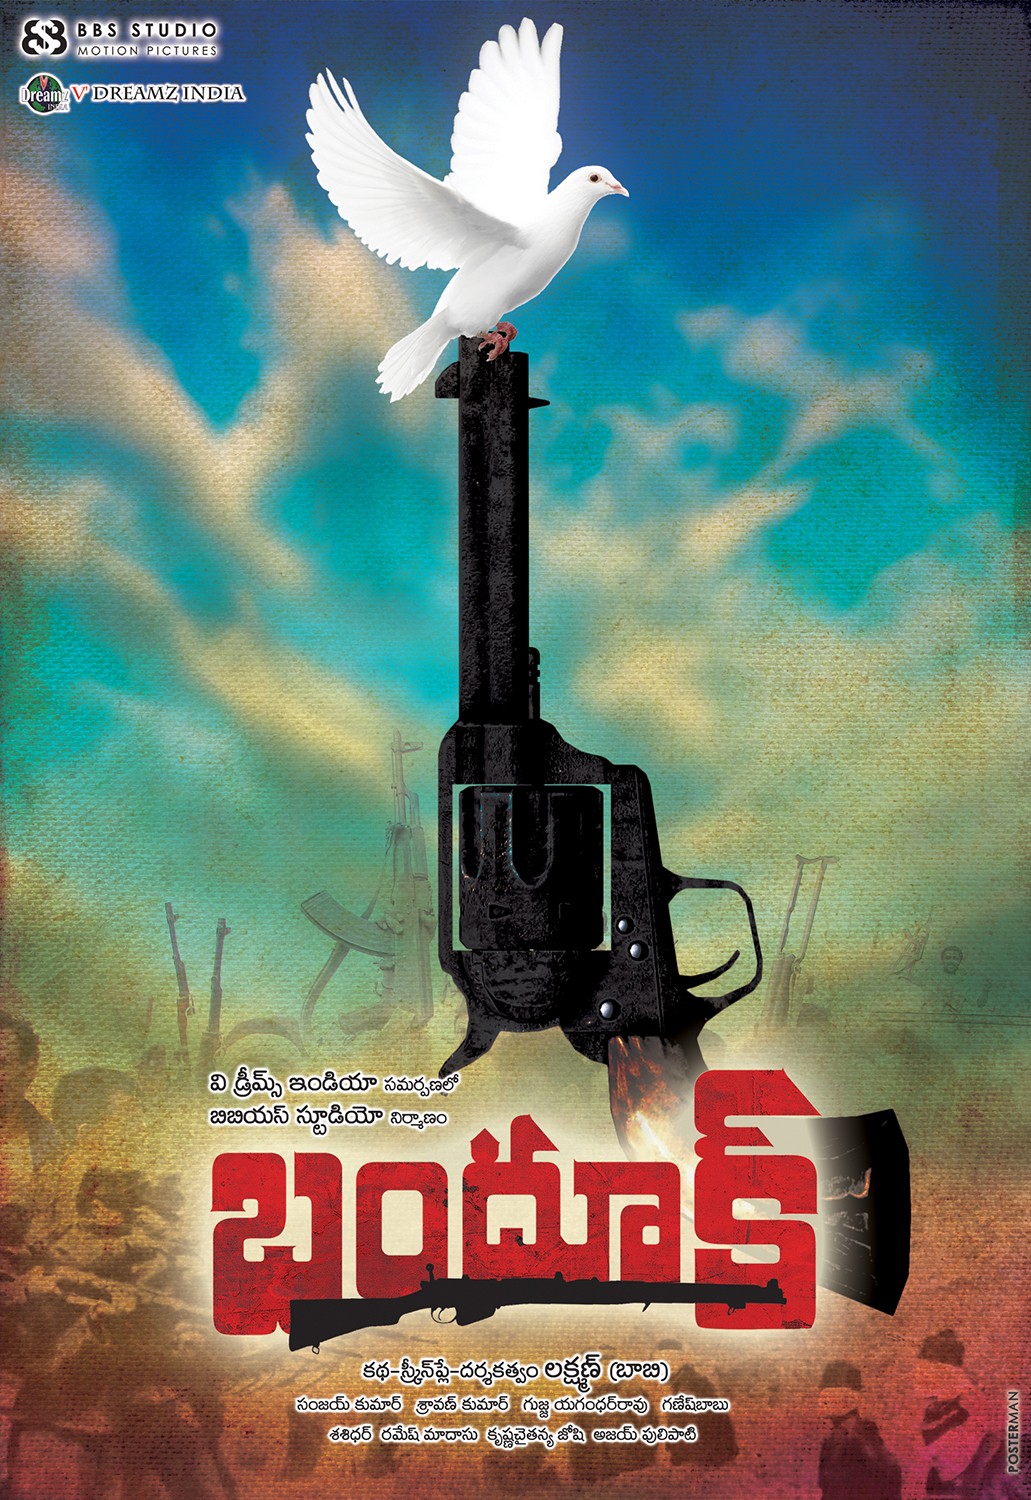 Extra Large Movie Poster Image for Bhandook 